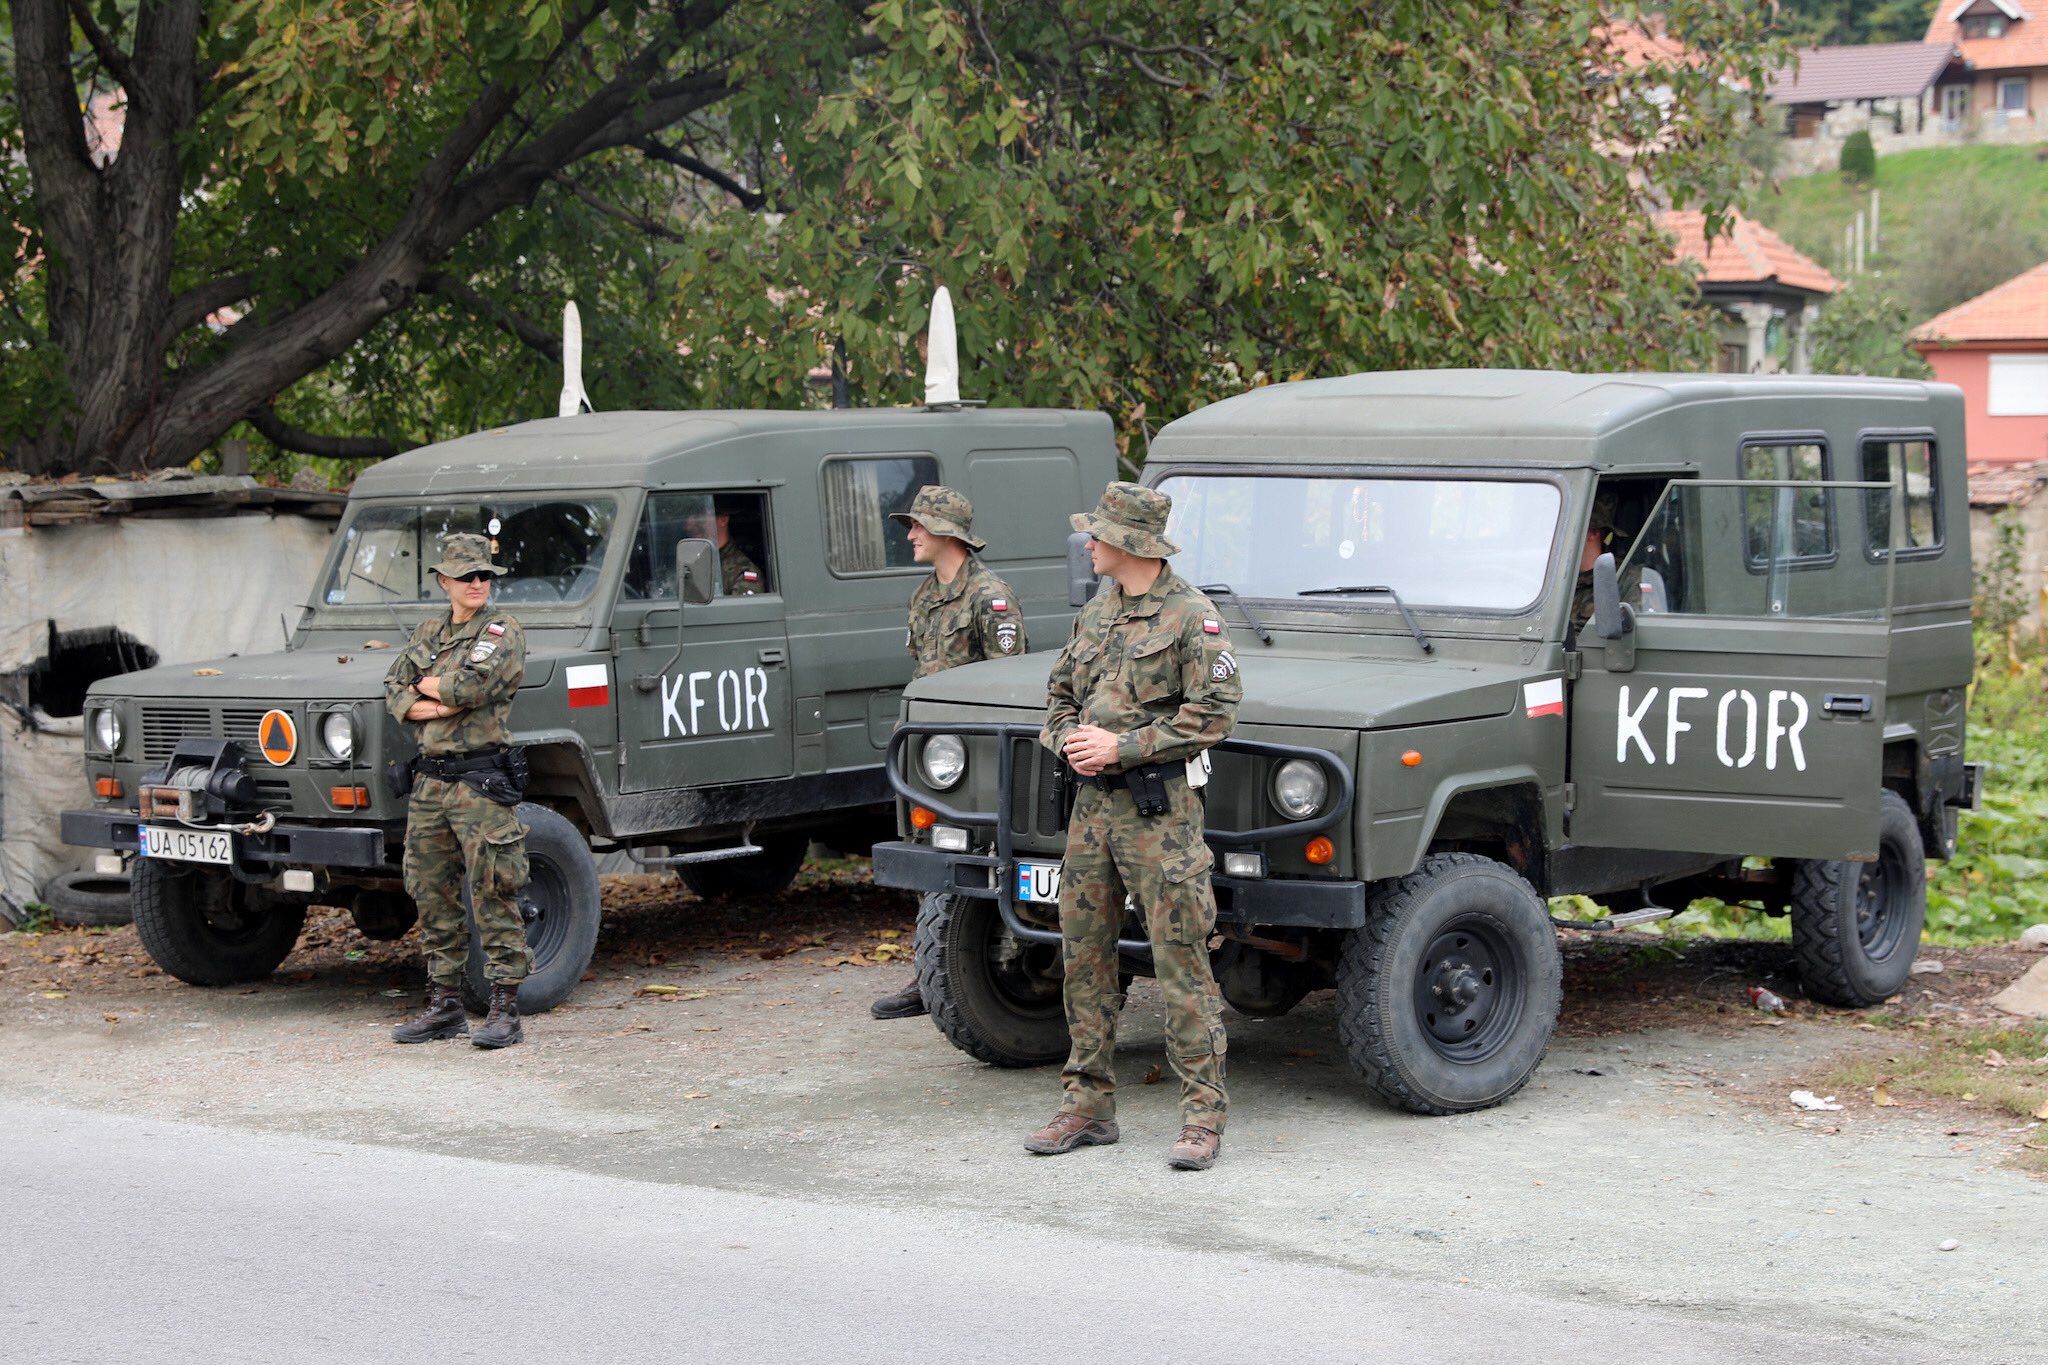 NATO Kosovo Force - KFOR on X: "We urge all sides to engage to enable  security and freedom of movement in Kosovo. @NATO_KFOR will continue  fulfilling our #UN mandate for all communities